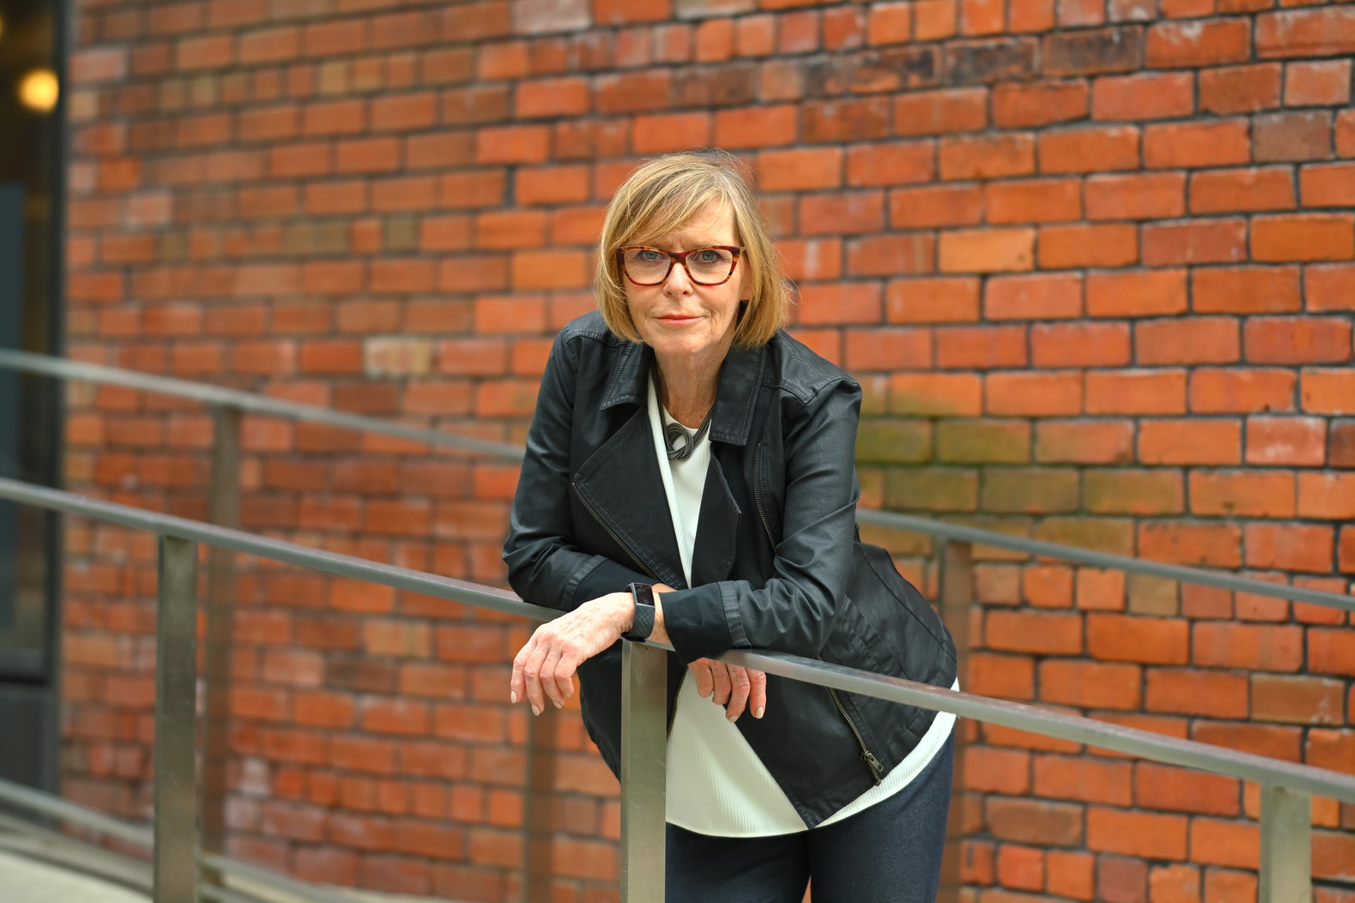 Join Suzanne Campbell speaking at WORKTECH2022 Toronto on building your resilient workplace